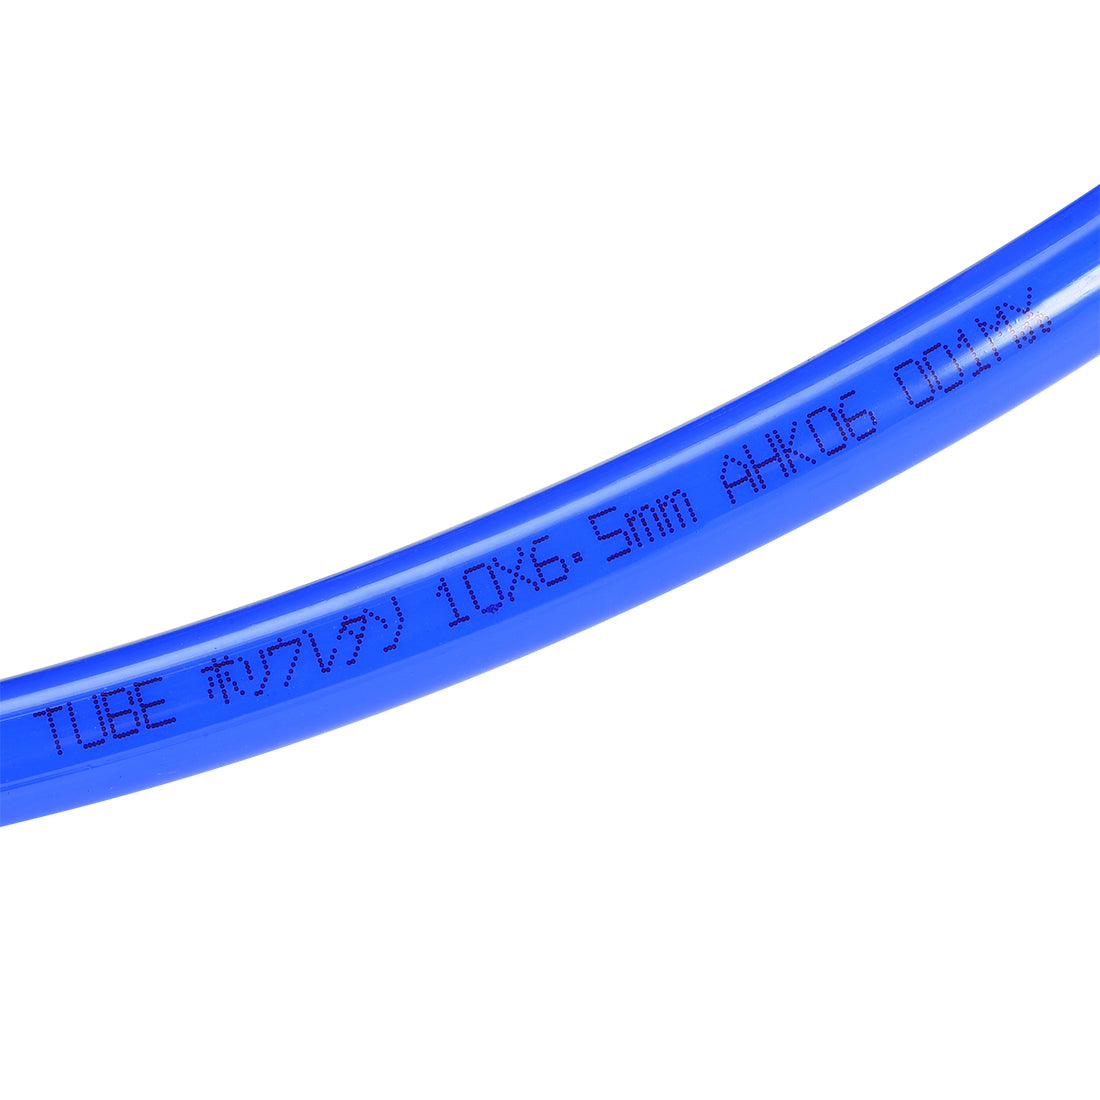 uxcell Uxcell Pneumatic Hose Tubing,10mm OD 6.5mm ID,Polyurethane PU Air Hose Pipe Tube,6 Meter 19.69ft,Blue